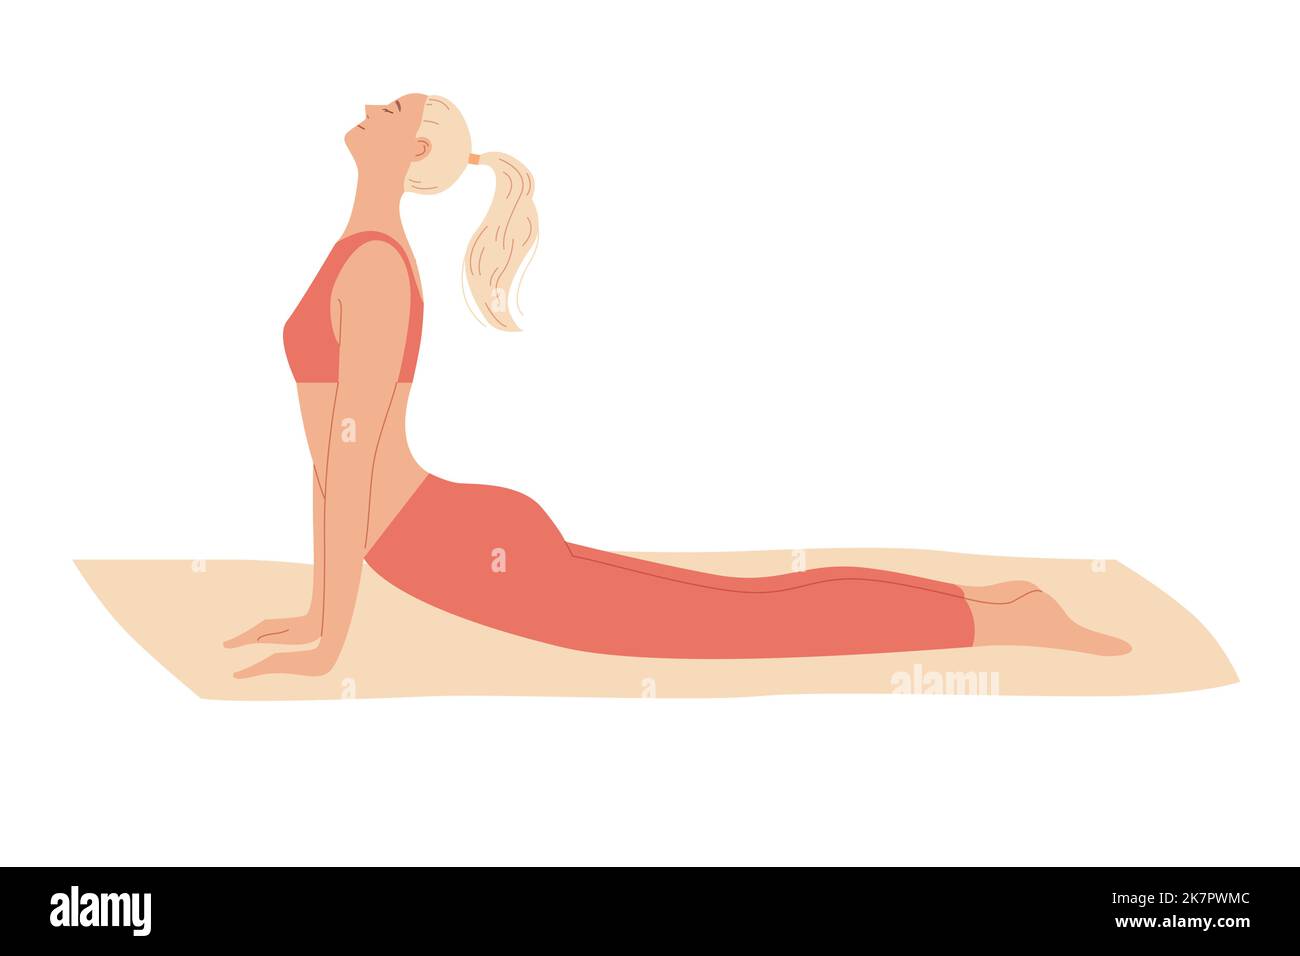 Woman exercises at home, stretches out, curves her back lying on the floor. Stock Vector